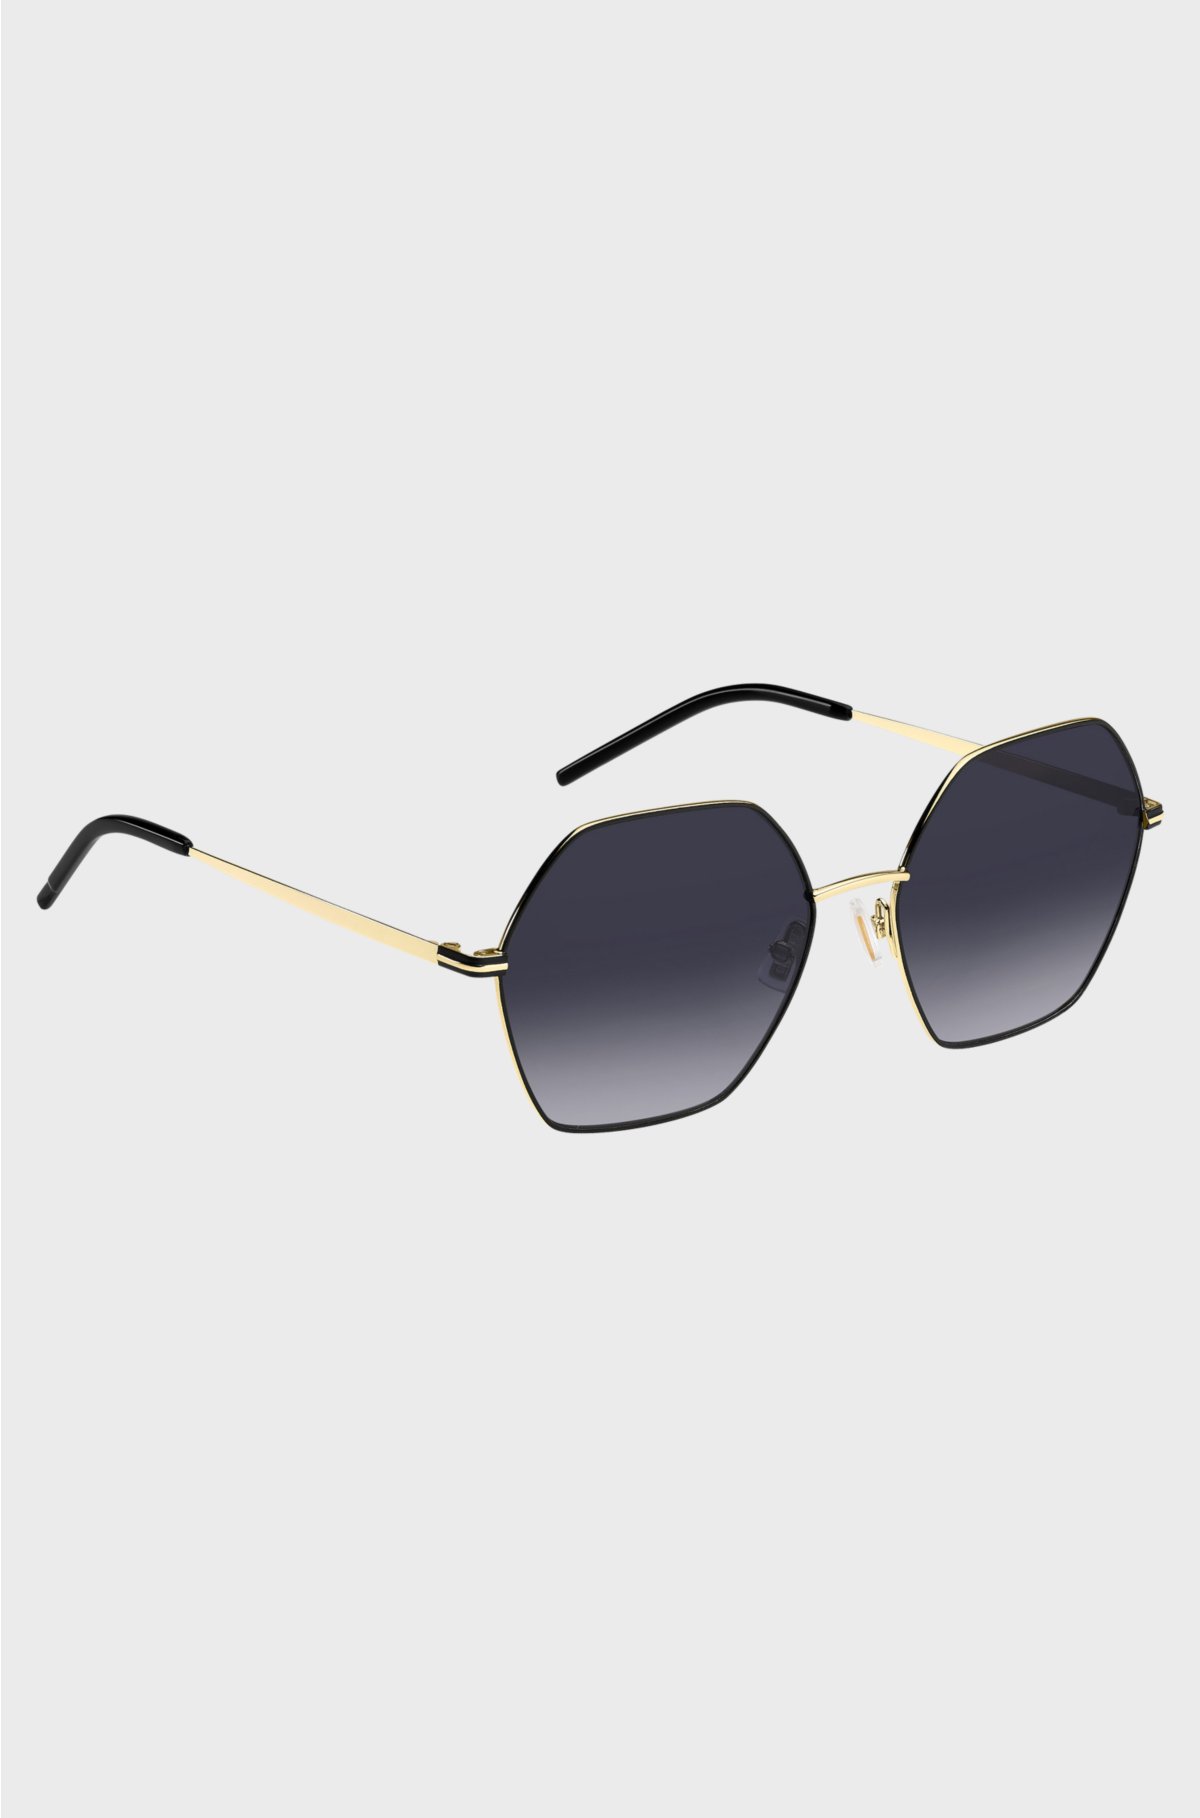 Angular sunglasses in black and gold-tone steel, Gold